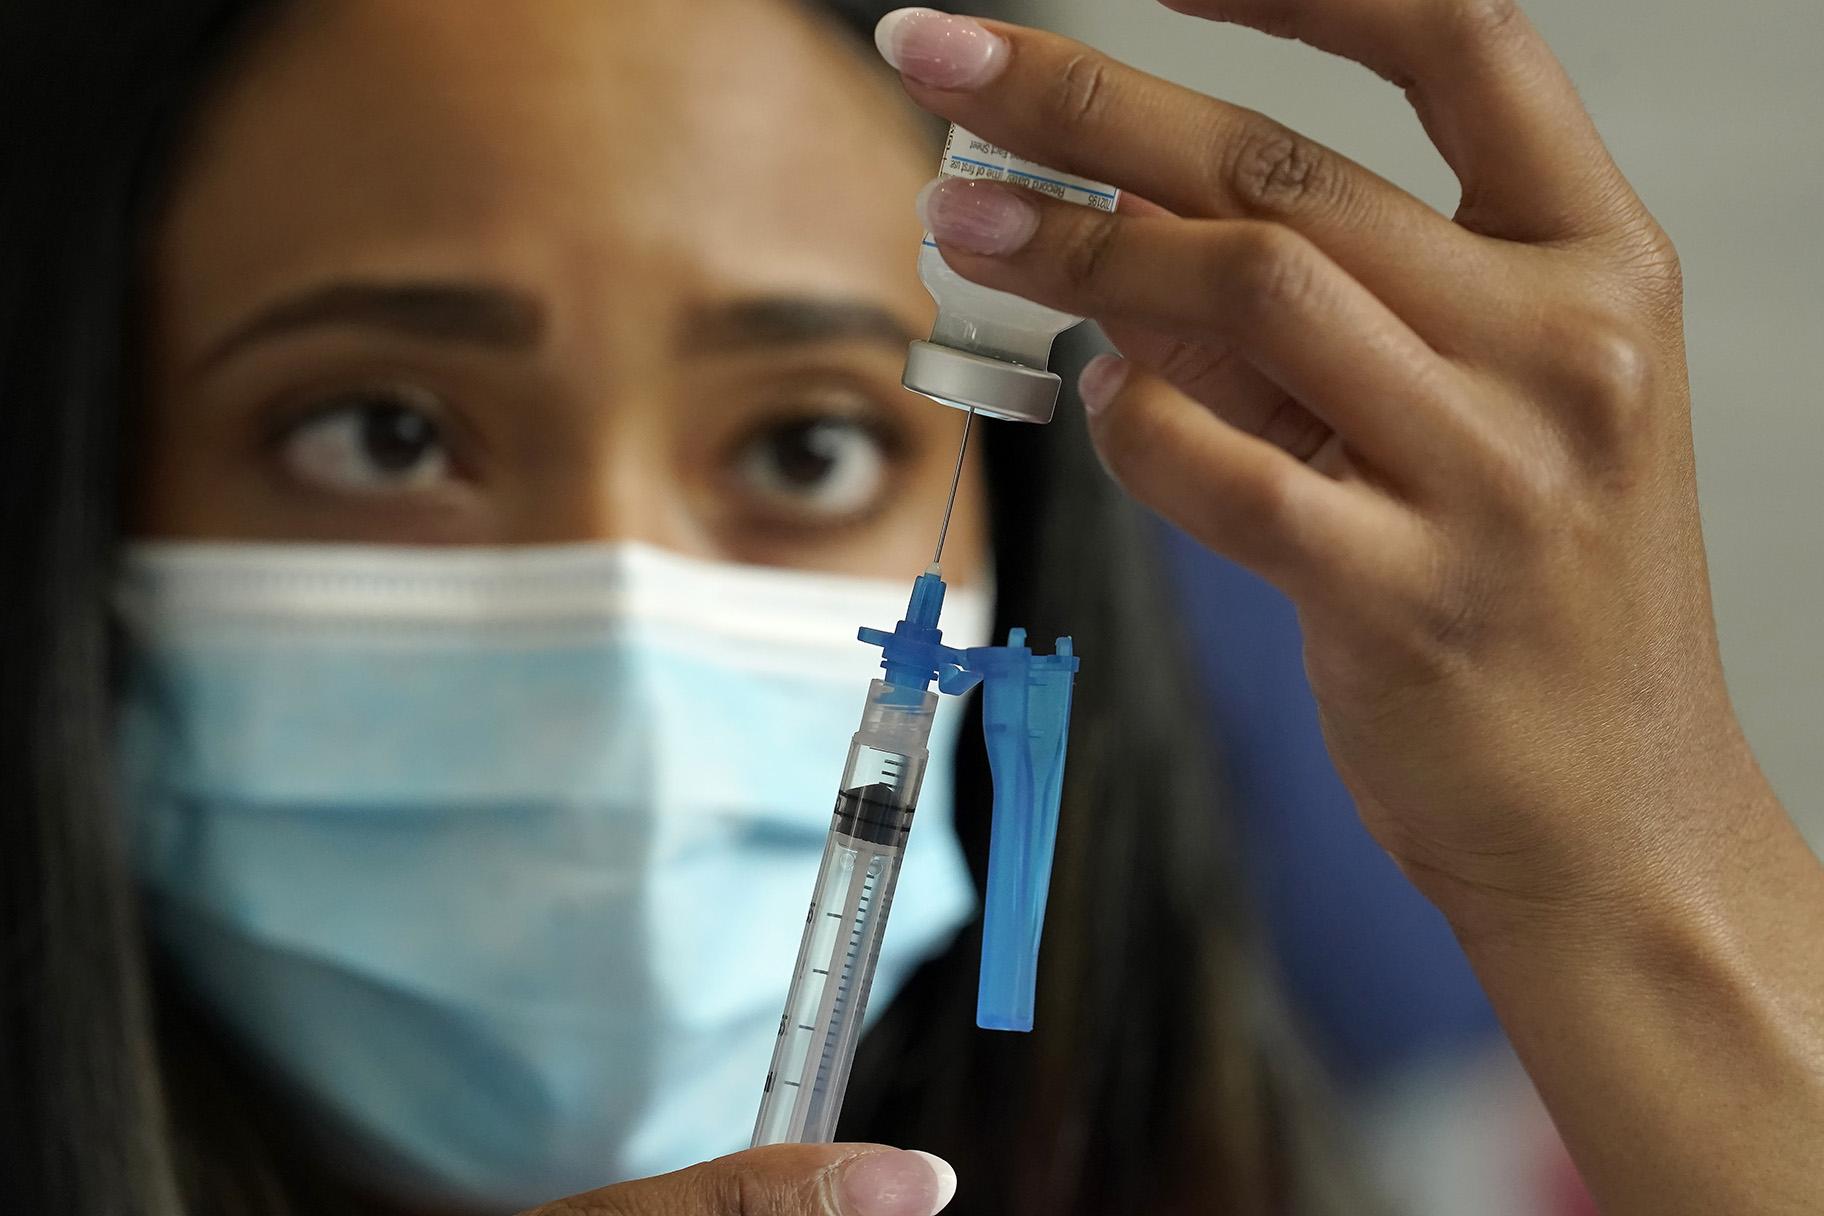 Licensed practical nurse Yokasta Castro, of Warwick, R.I., draws a Moderna COVID-19 vaccine into a syringe at a mass vaccination clinic, Wednesday, May 19, 2021, at Gillette Stadium, in Foxborough, Mass. (AP Photo / Steven Senne)